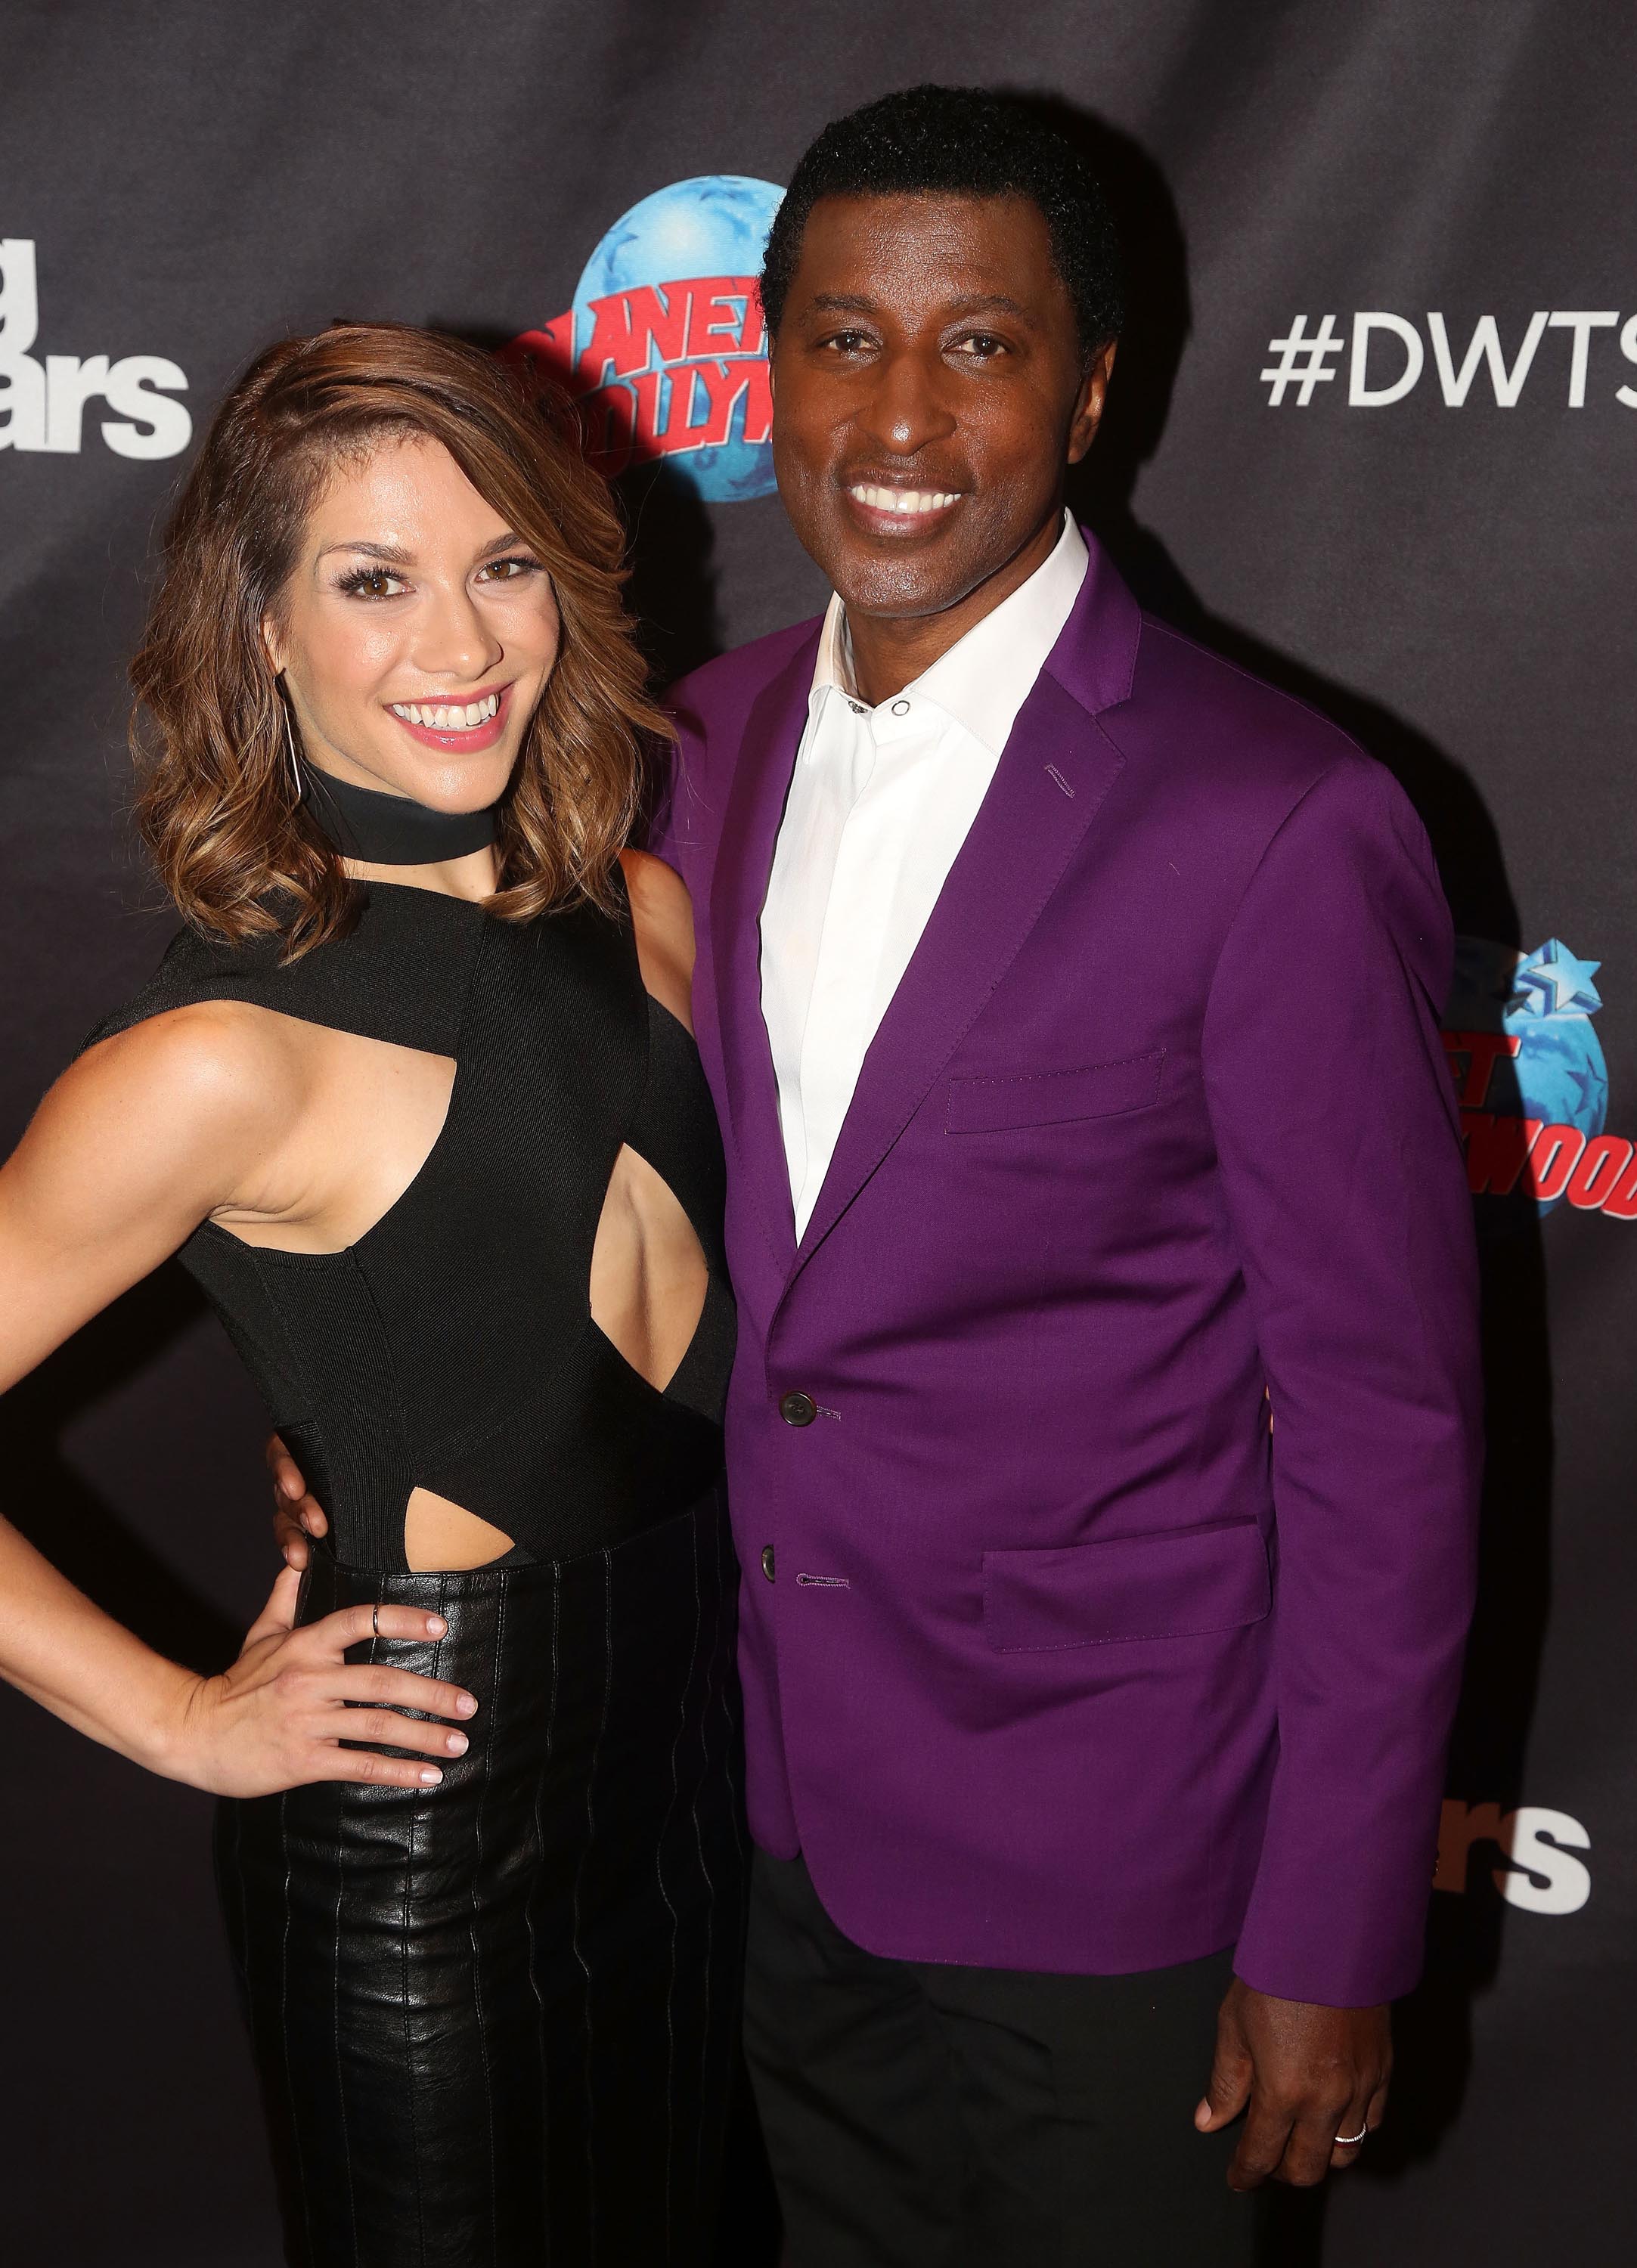 Allison Holker poses as Season 23 of Dancing With The Stars